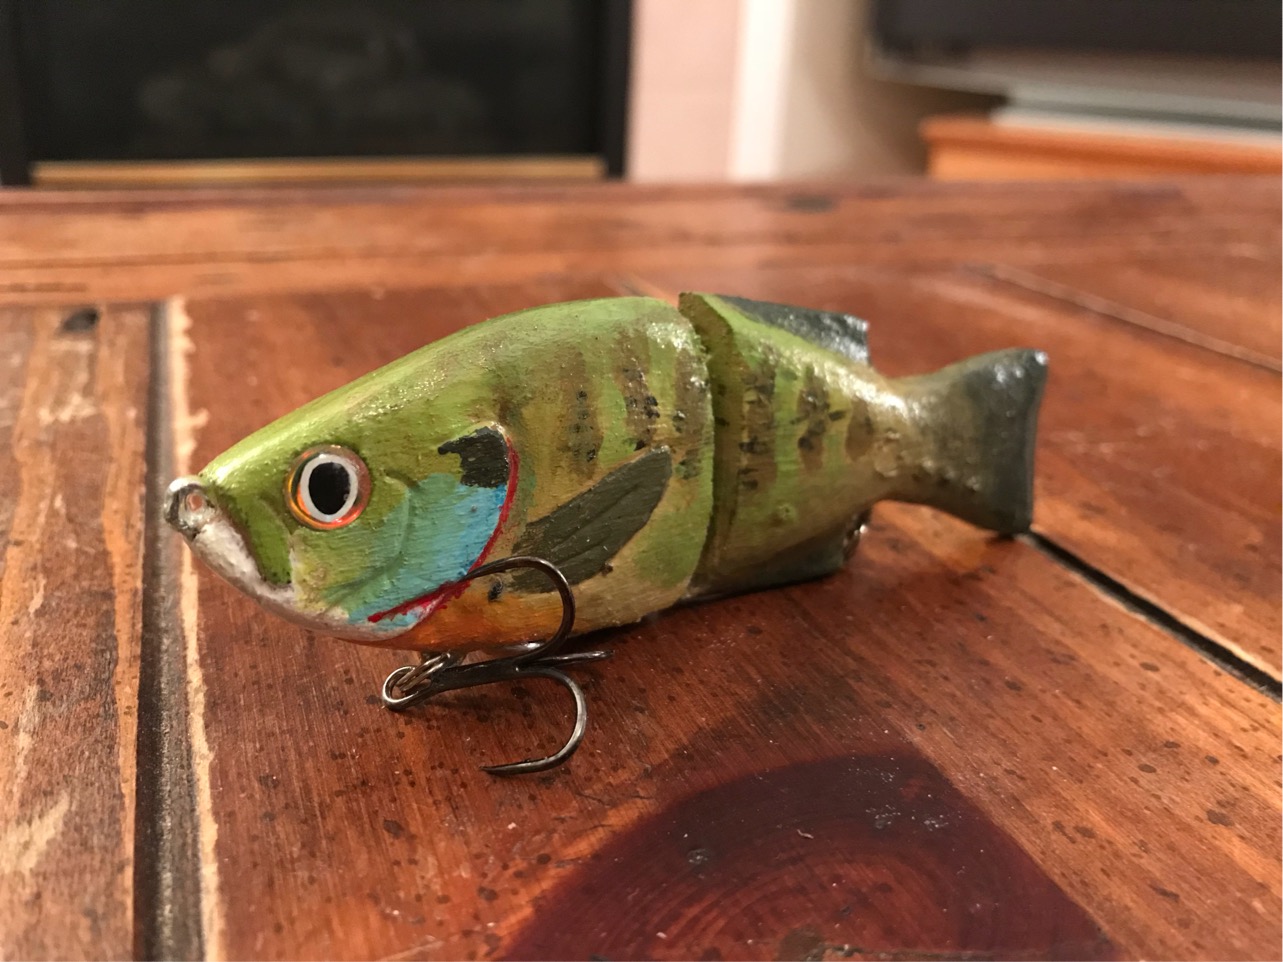 Few question on carving wooden lures, materials need etc. - Tacklemaking - Bass  Fishing Forums